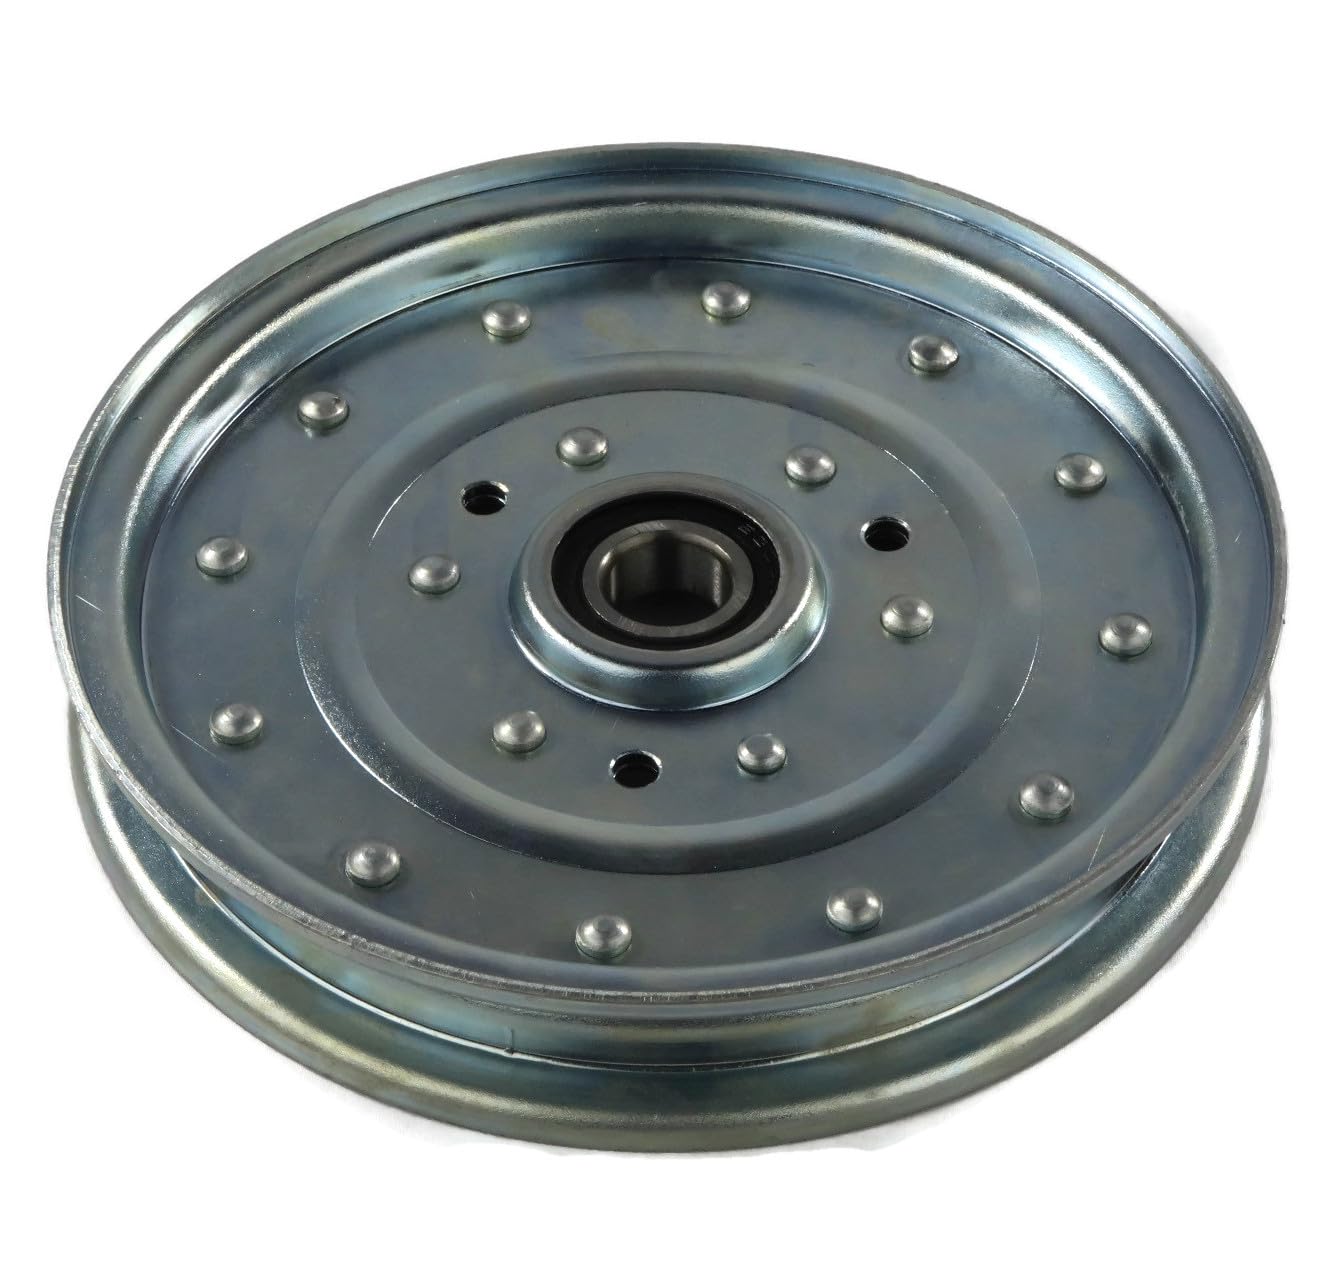 The ROP Shop Flat Idler Pulley for 2005-2007 Toro Z Master Z453-74417 with 48" Deck Mowers